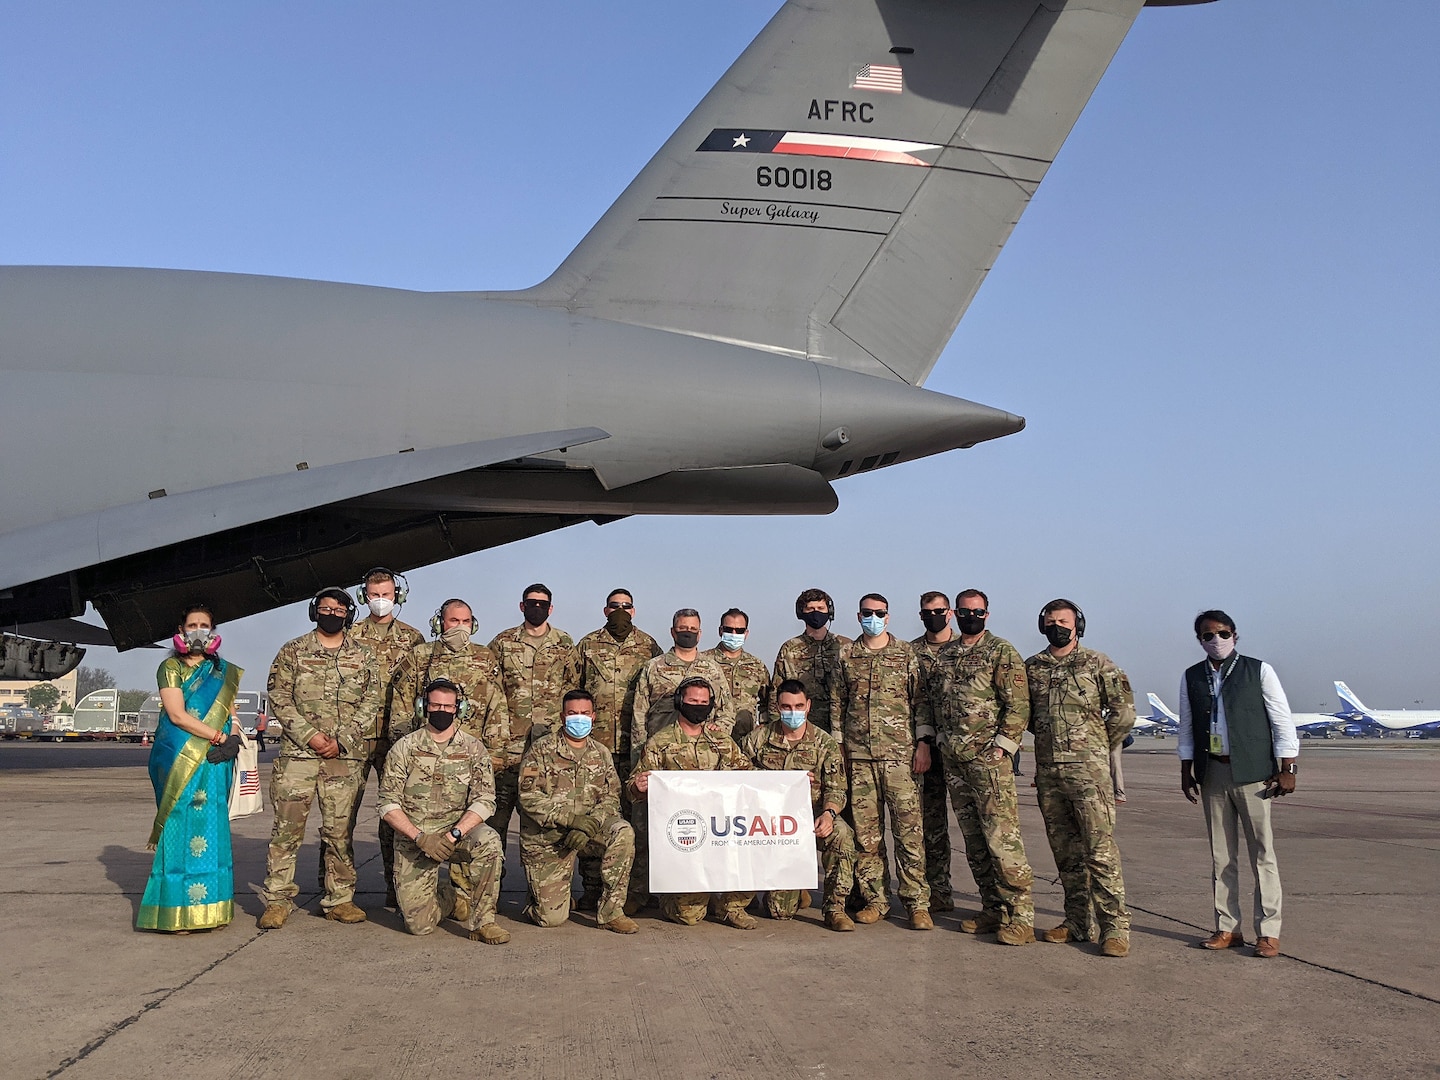 The crew of the 433rd Airlift Wing C-5M Super Galaxy "Reach 281" and others pose May 5 at the airport in New Delhi, India.